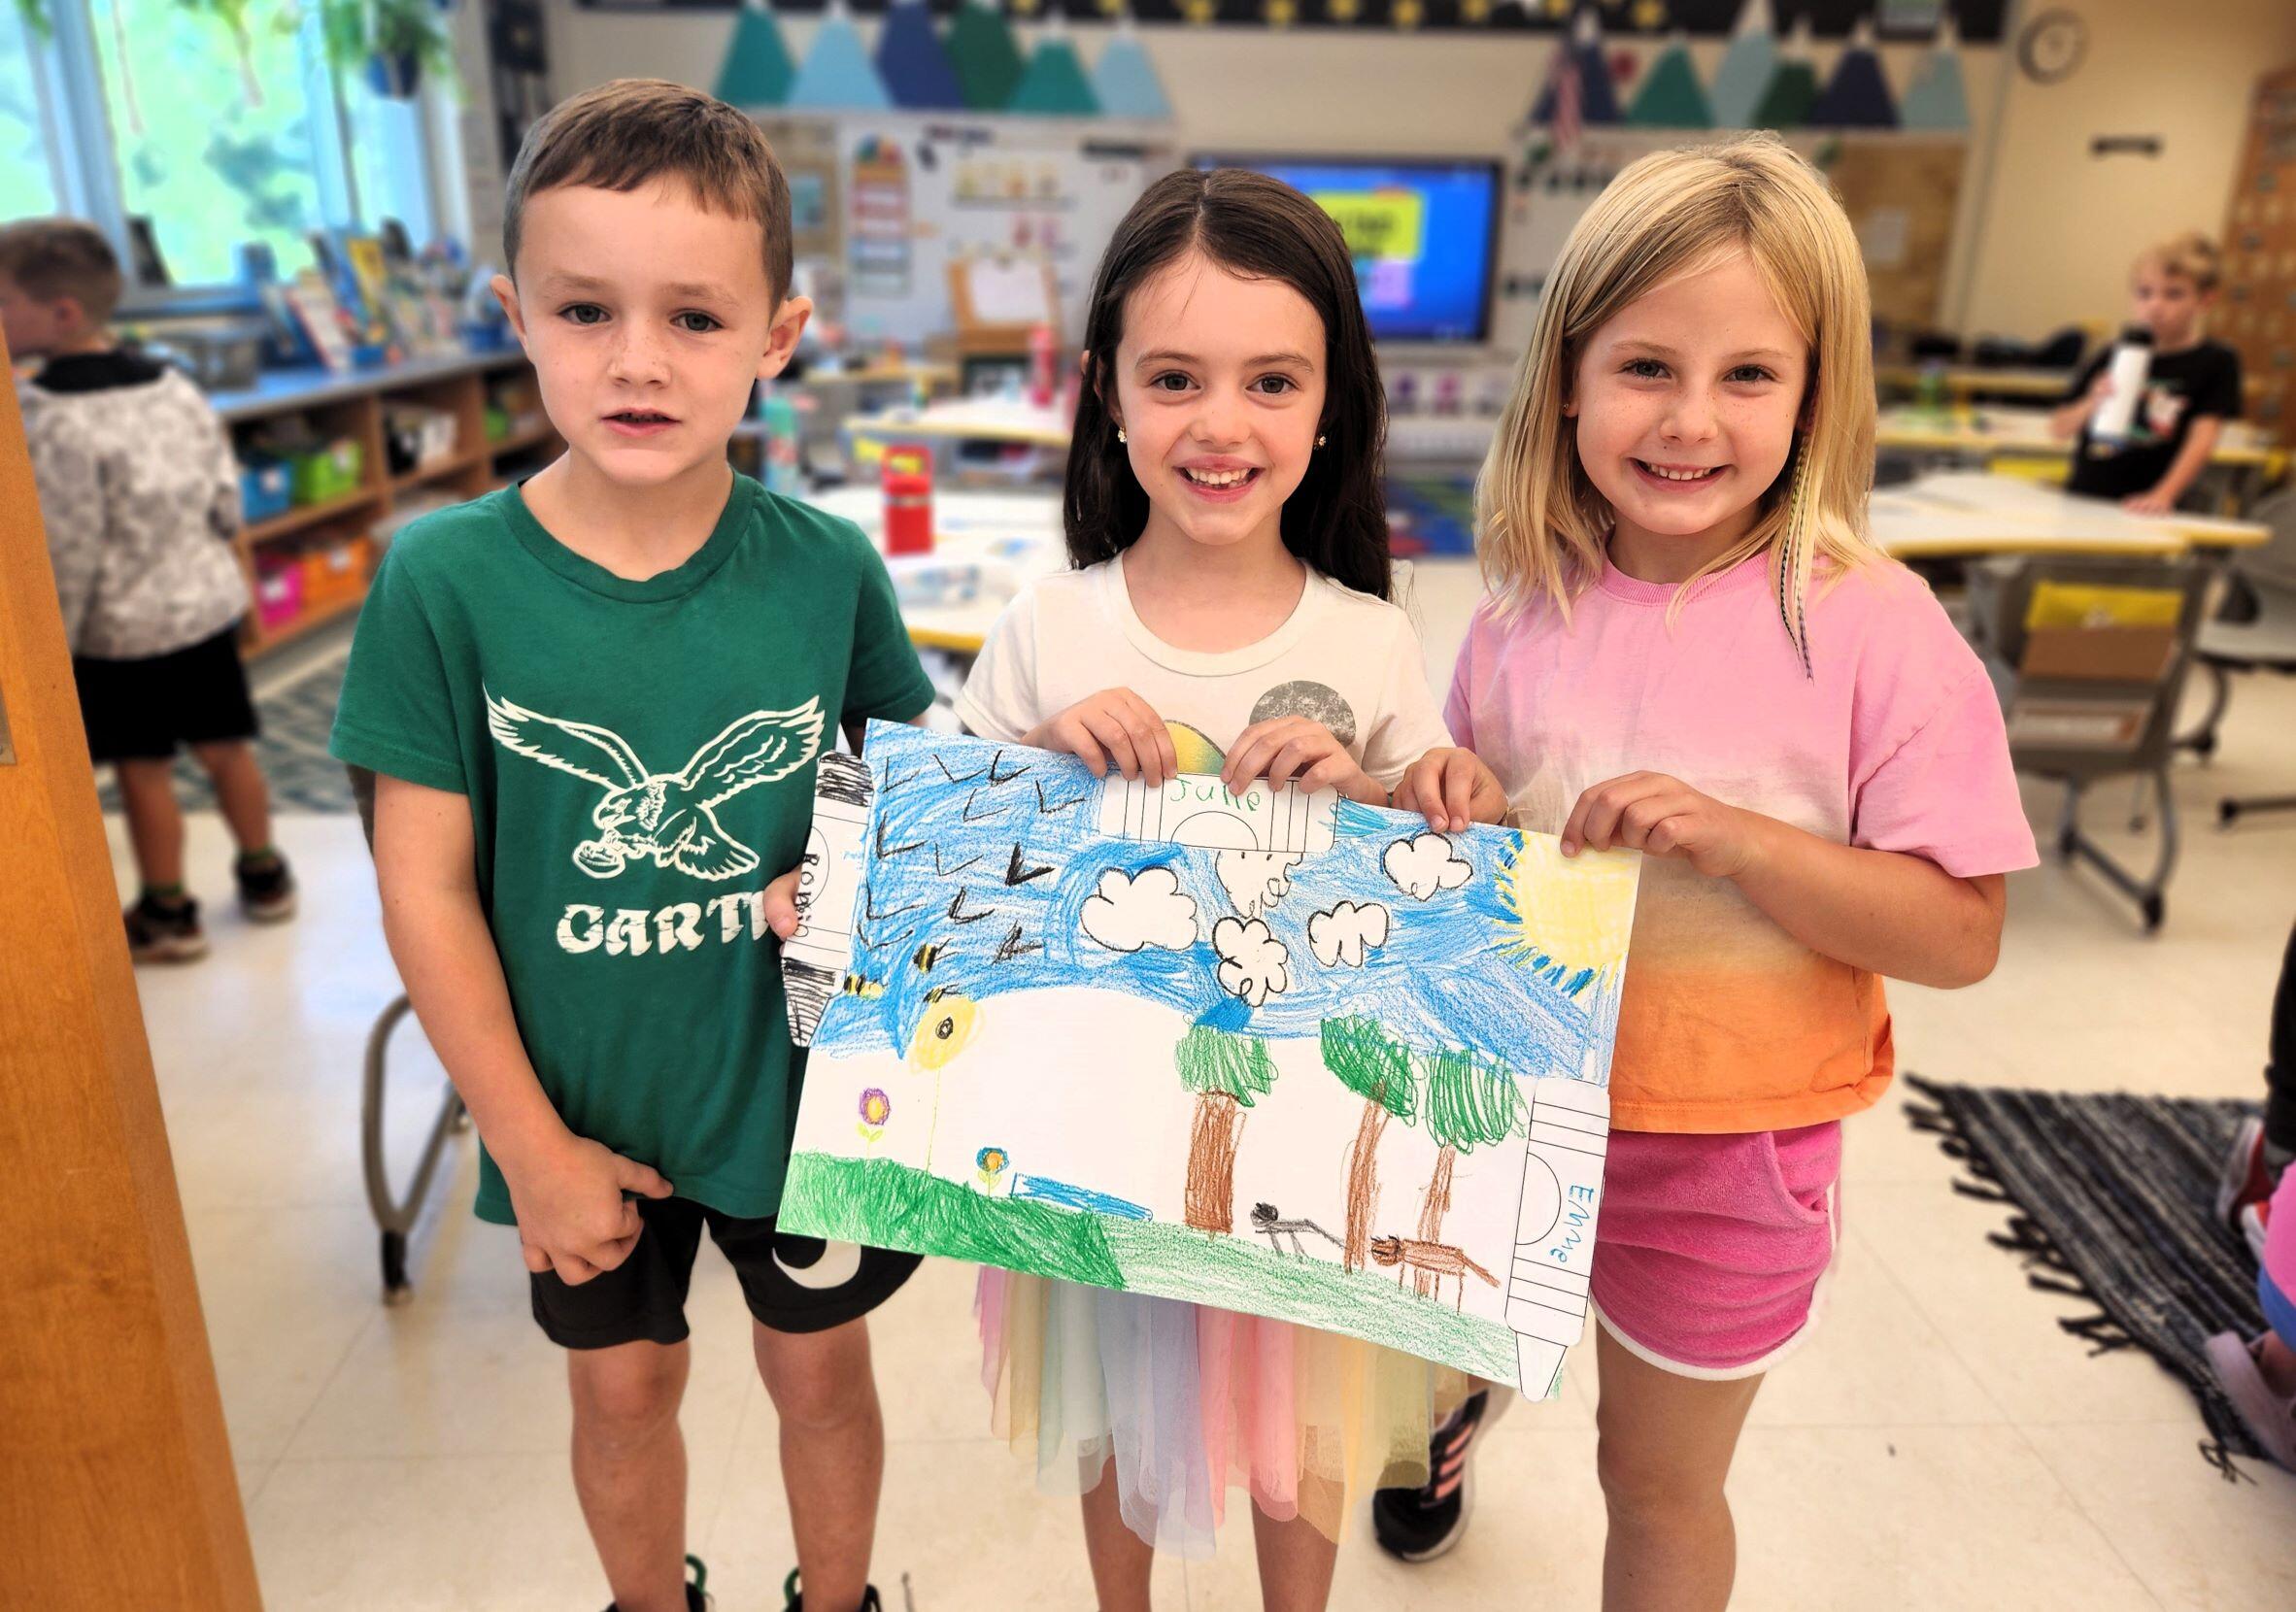 Three students show off their picture